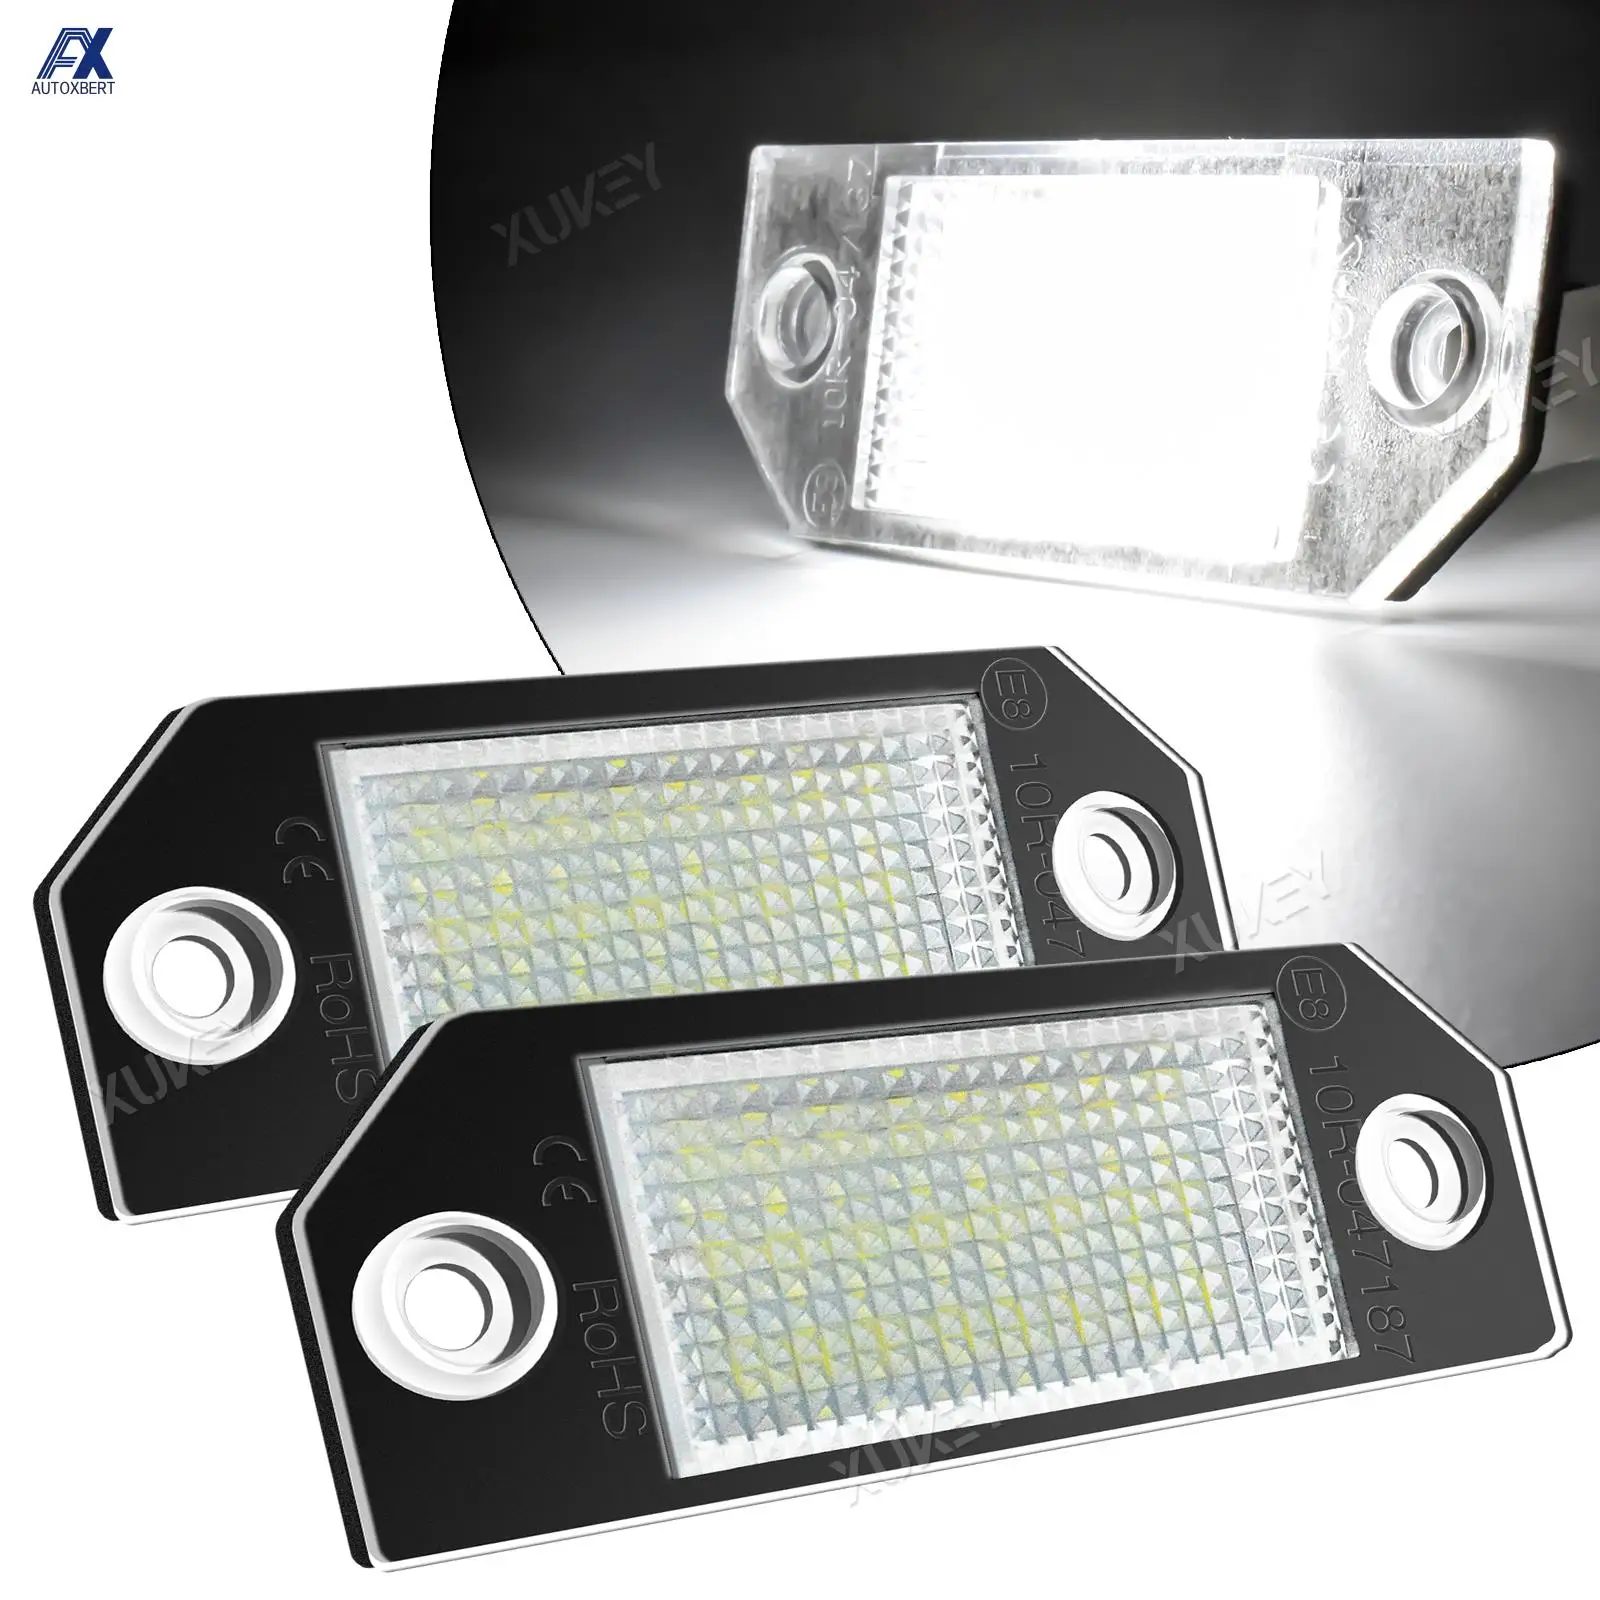 2x LED License Number Plate Light Lamps 24SMD Car Accessories For Ford Focus 2 MK2 ST 225 C Max 2003 2004 2005 2006 2007 2008